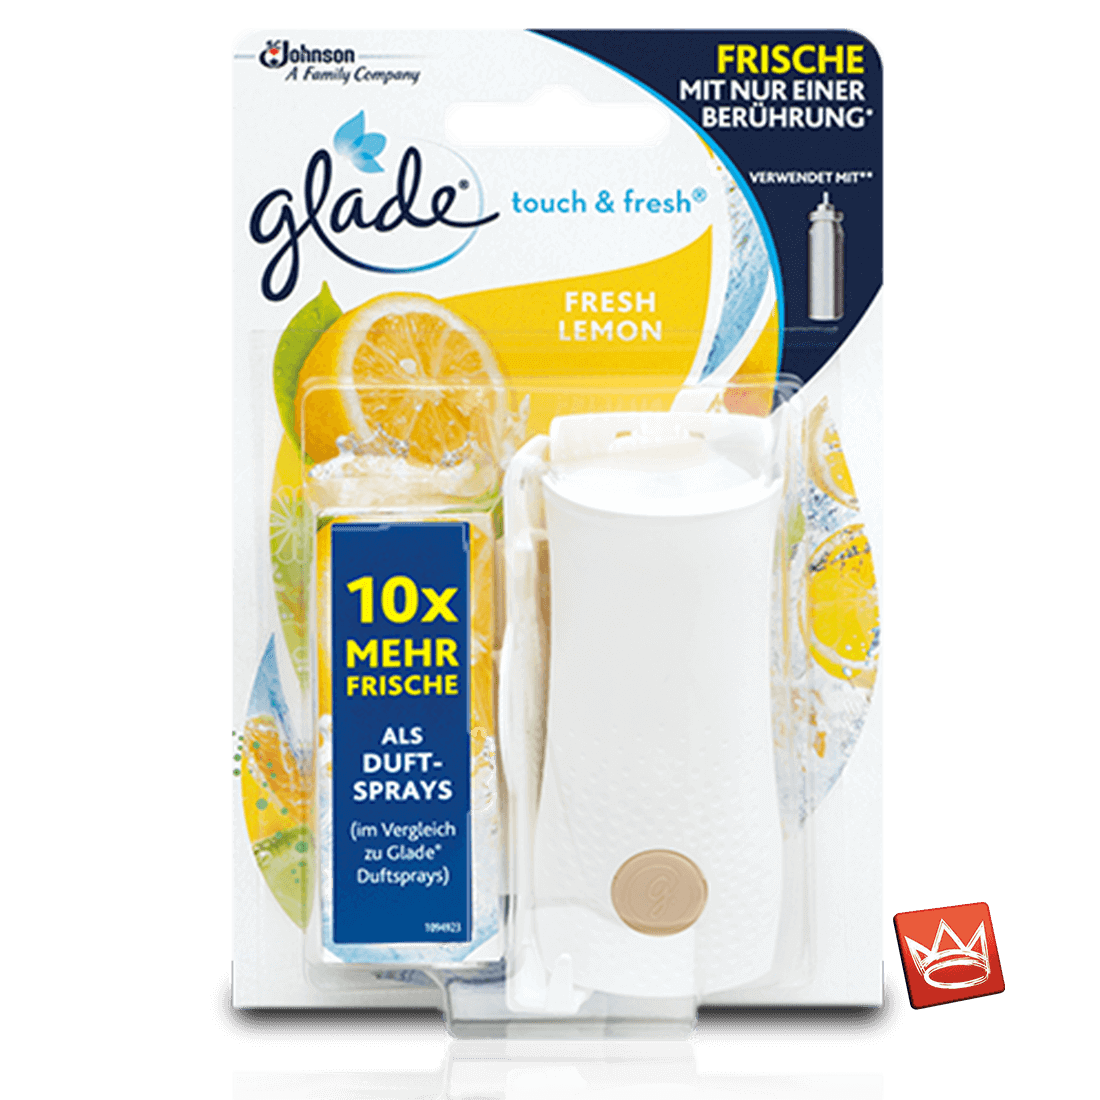 Glade® One touch & fresh® inkl. Dufthalter